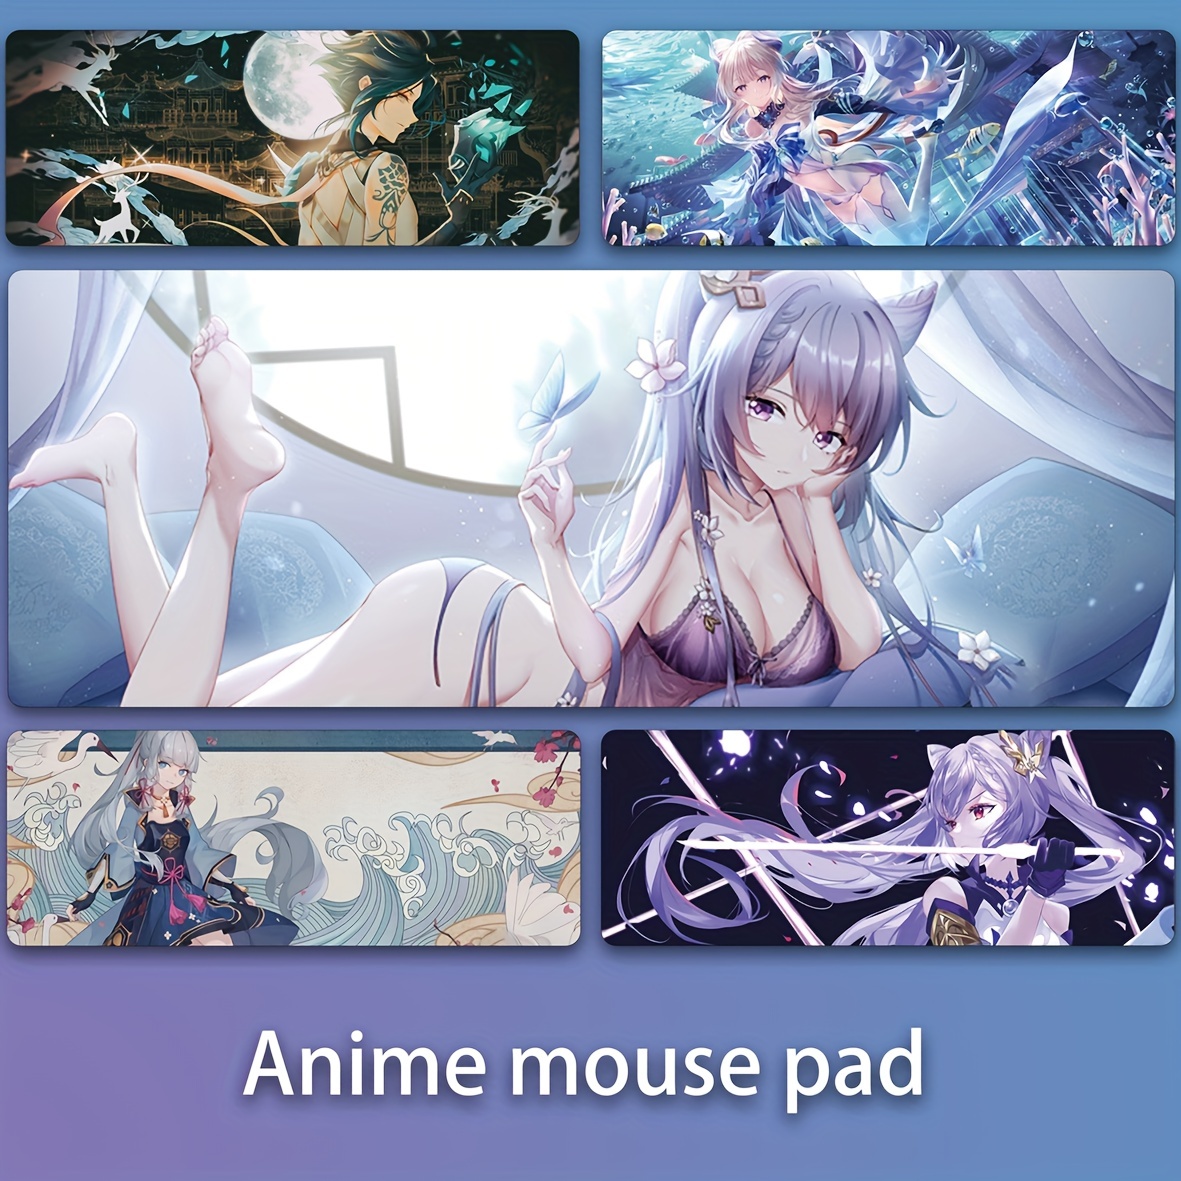 Amazon.com: Anime Girl Sexy Butt RGB Mouse Pad XXL Computer Keyboard Pad  LED Gaming Mouse Pad USB Gamer Play Mats PC Table Mat 24 inch x12 inch -A1  : Video Games